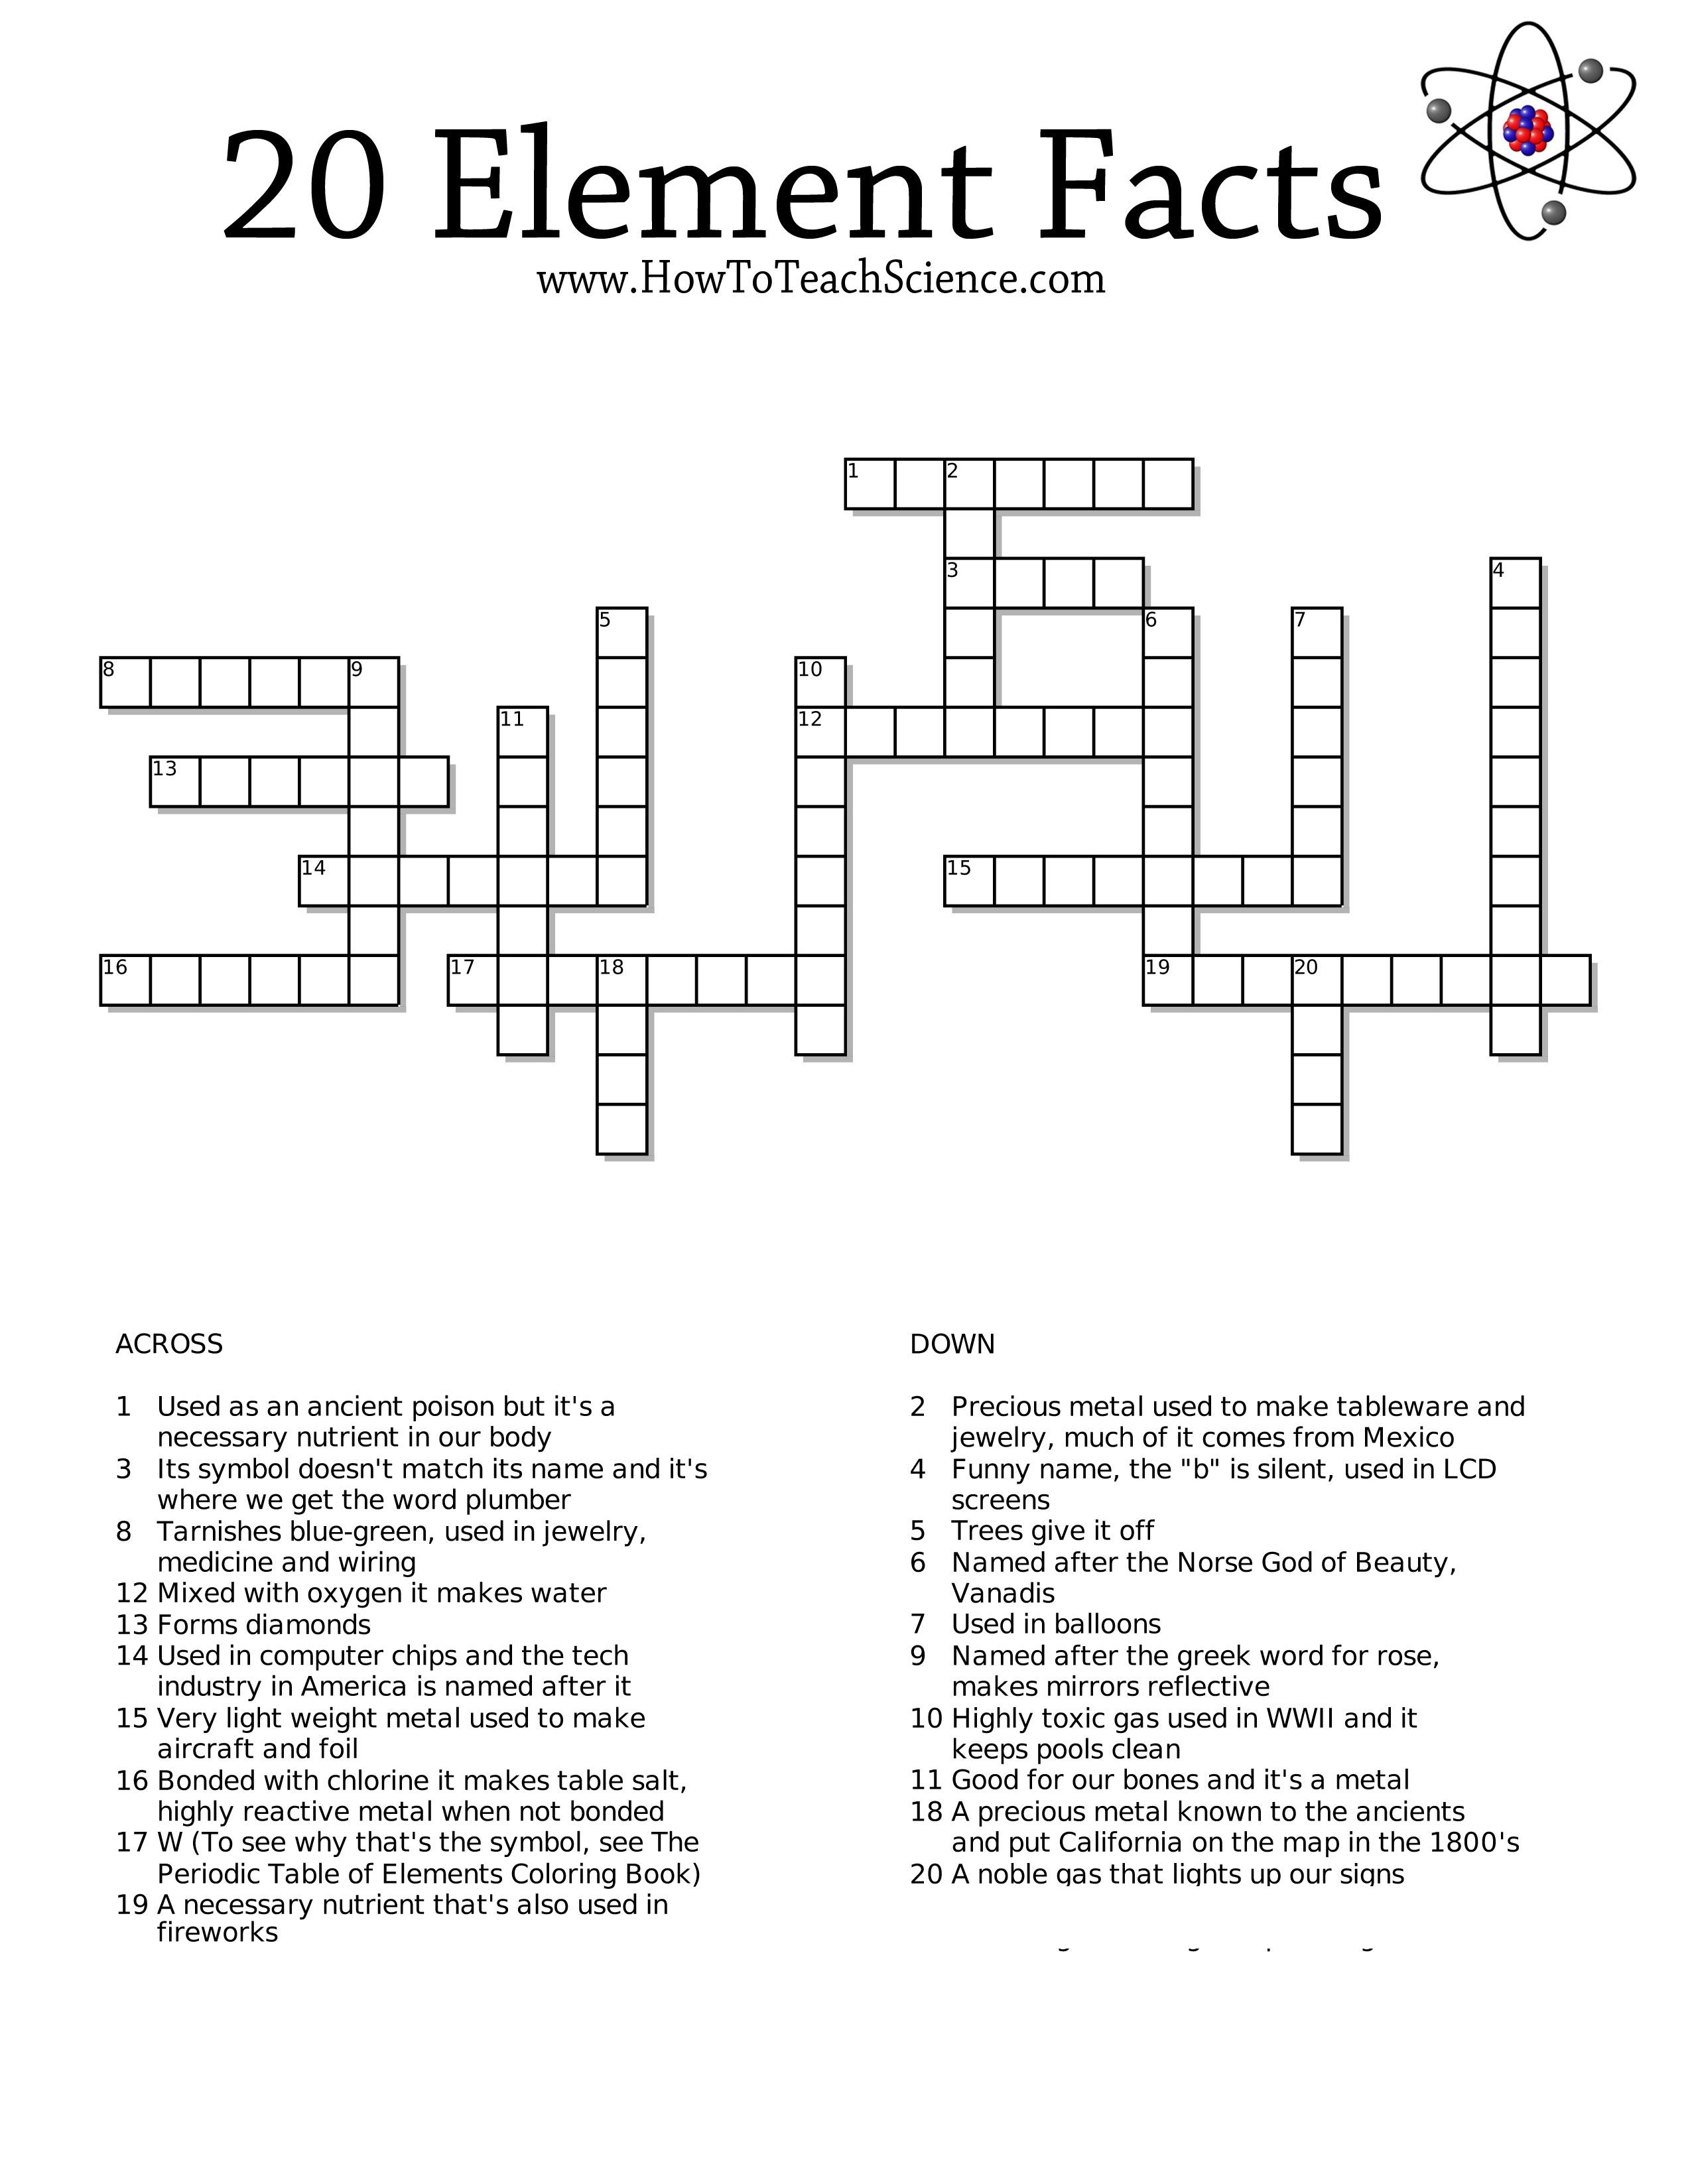 Free Crossword Printables On The Elements For 3Rd Grade Through High - Printable Crossword Puzzles For 3Rd Graders